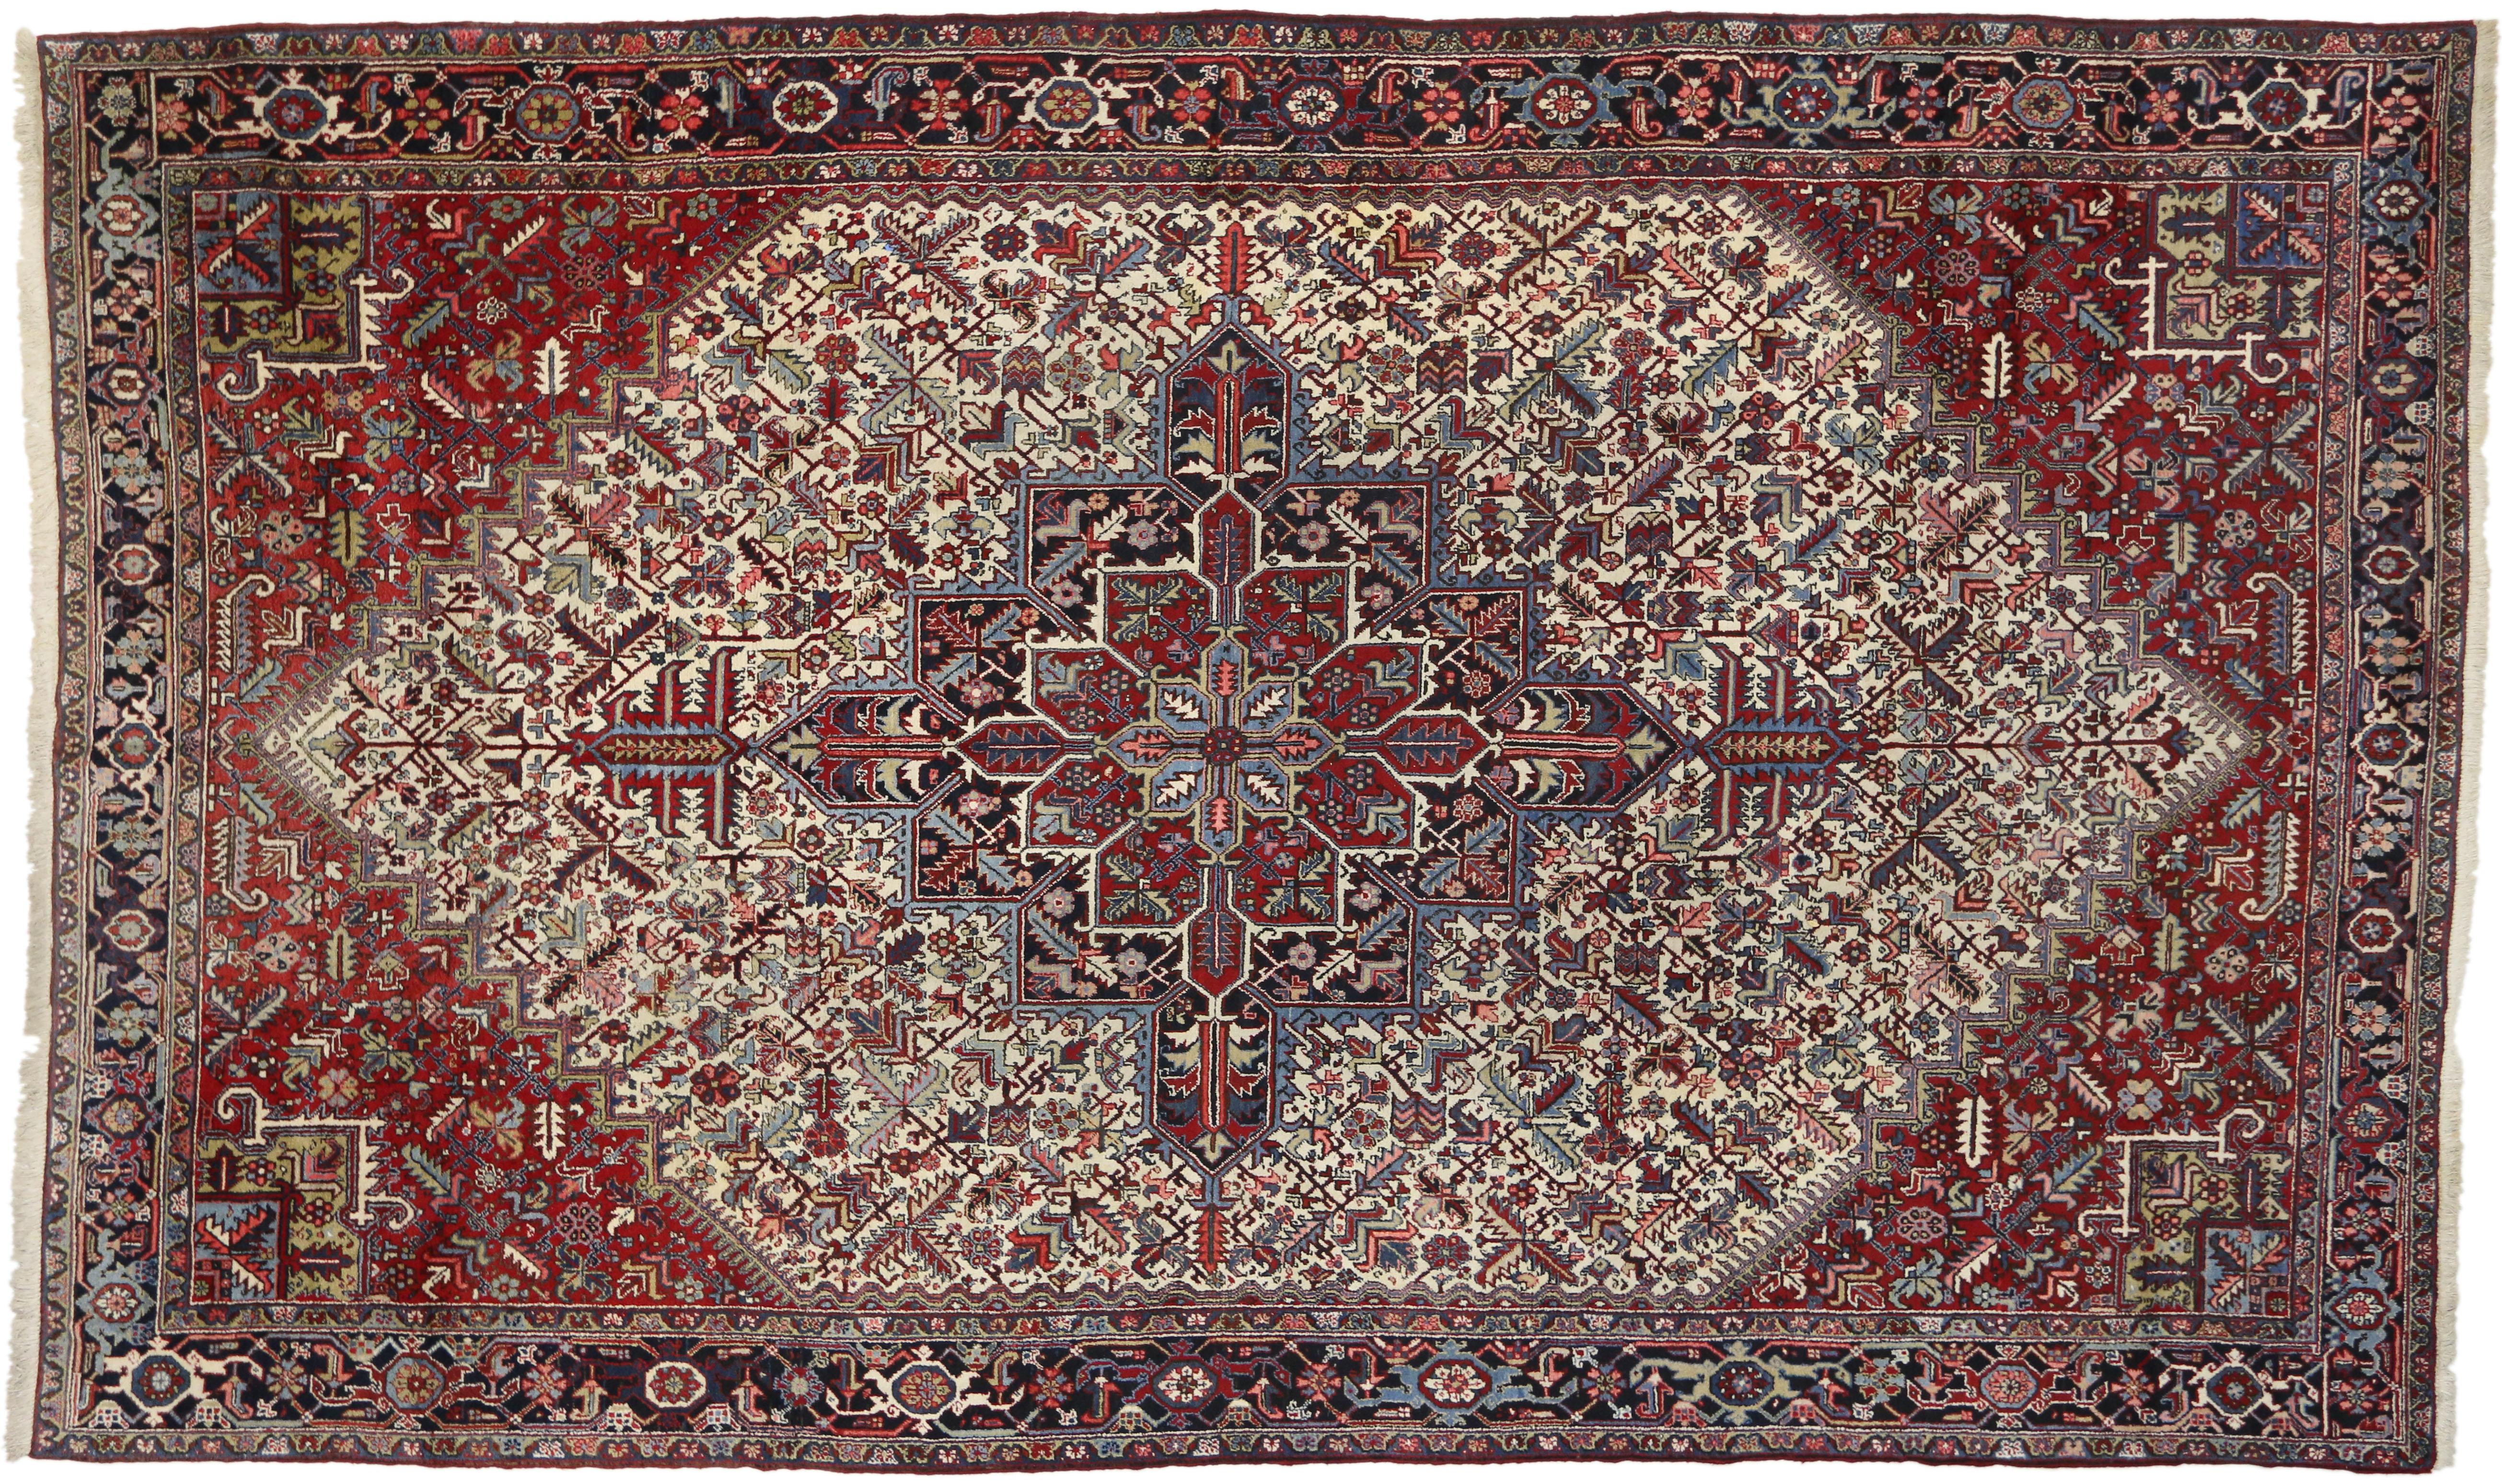 Oversized Antique Heriz Persian Rug, Stylish Durability Meets Perpetually Posh In Good Condition For Sale In Dallas, TX